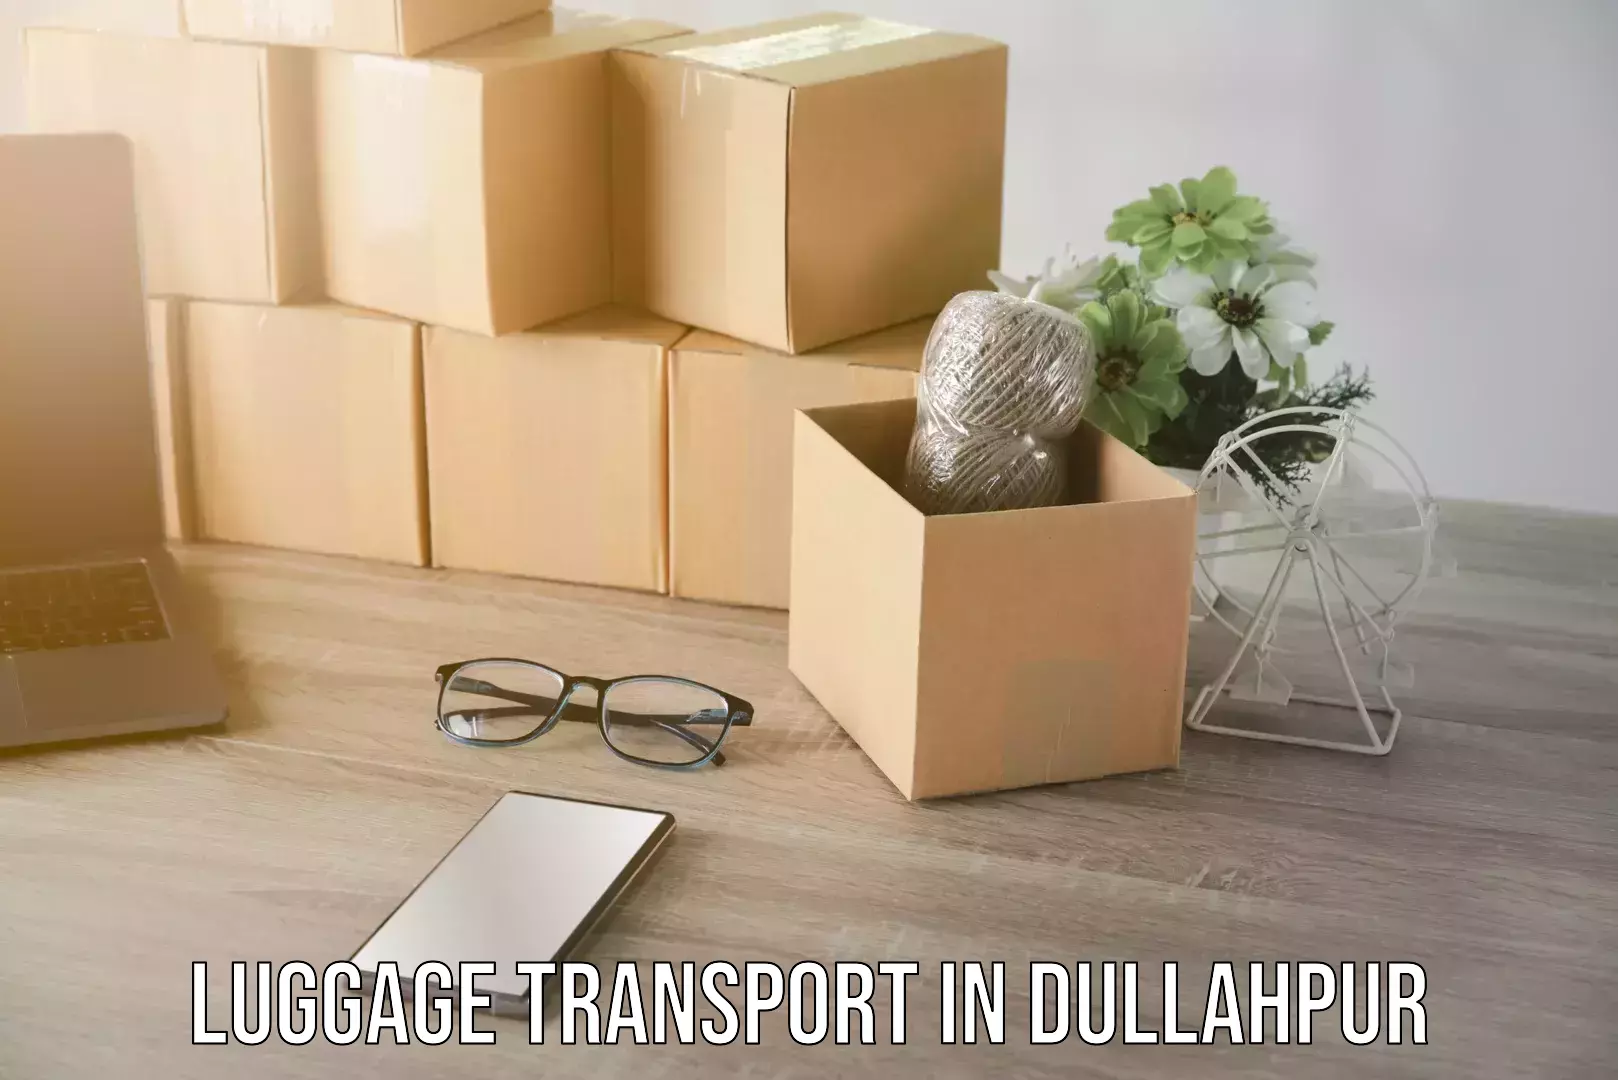 Holiday season luggage delivery in Dullahpur